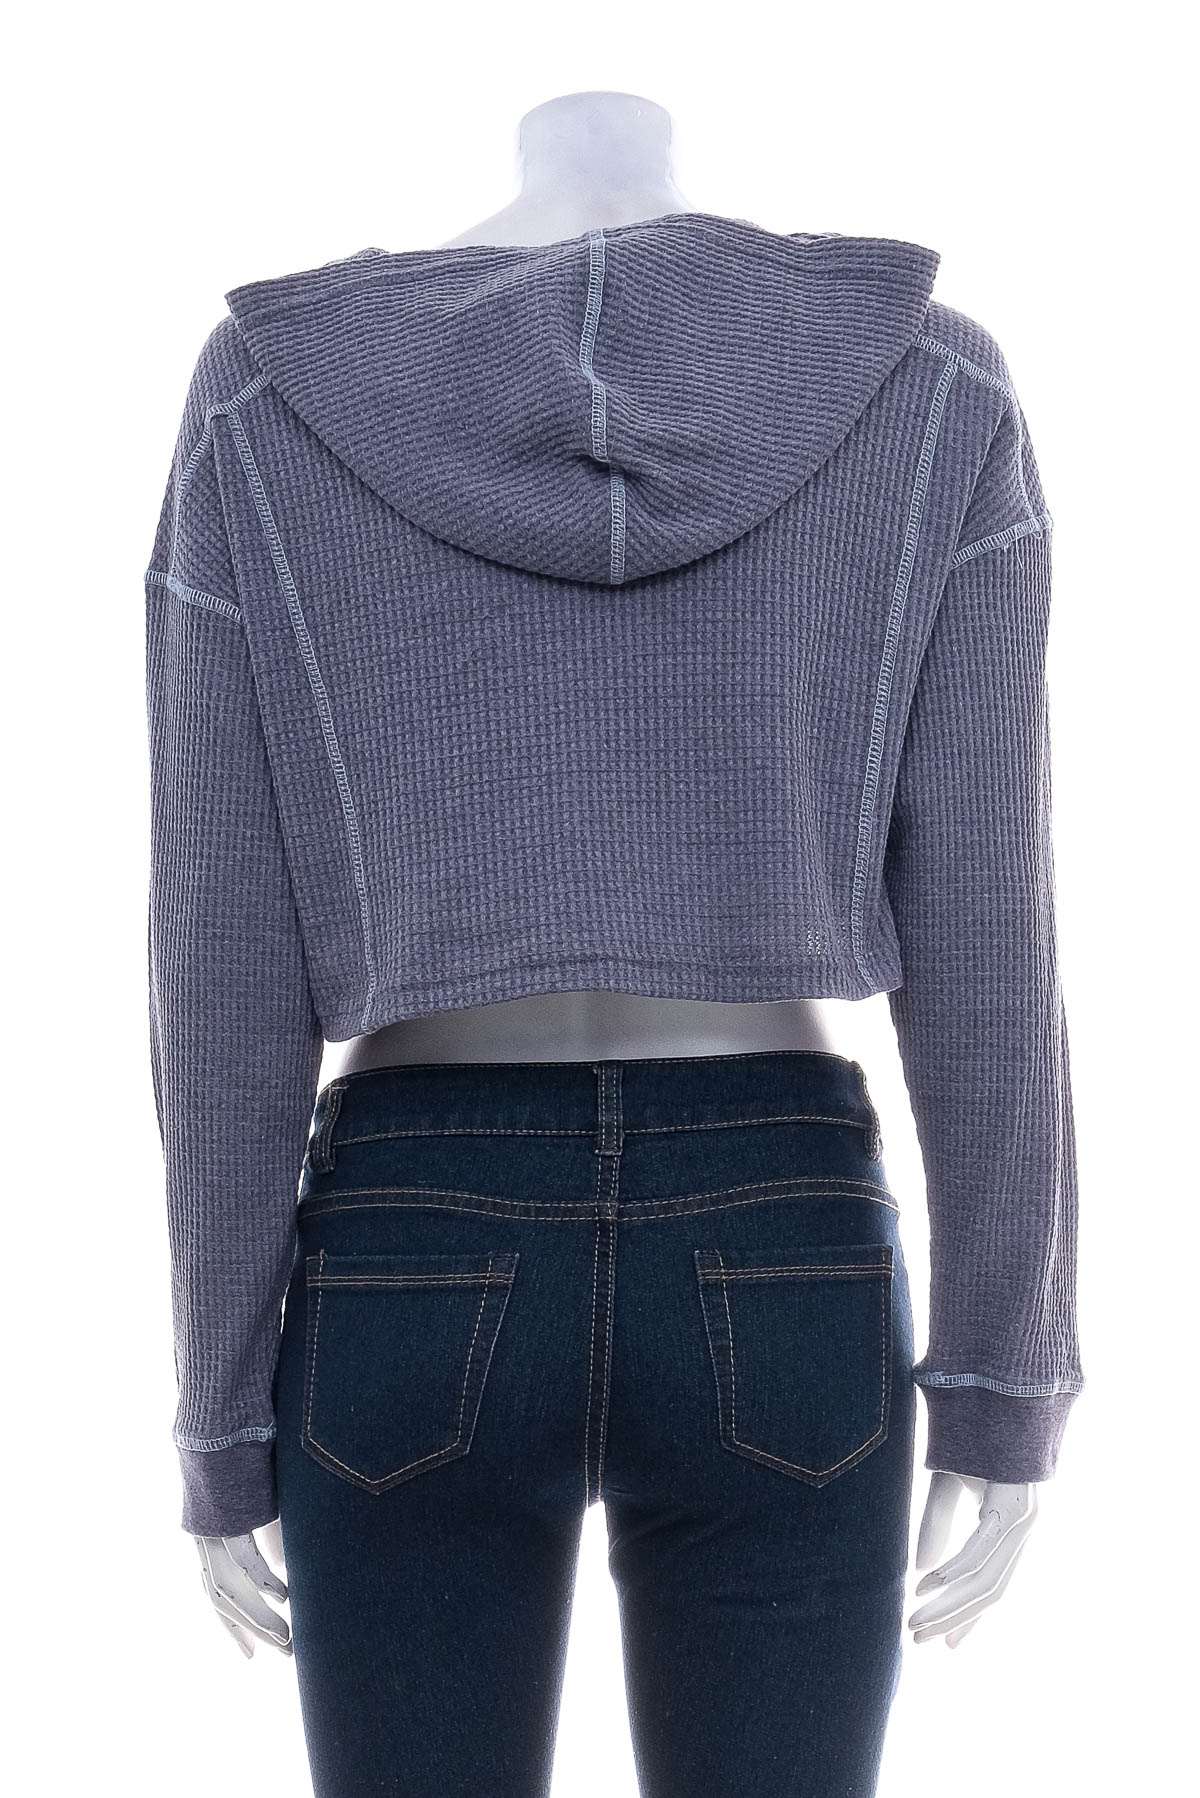 Women's sweater - Almost Famous - 1